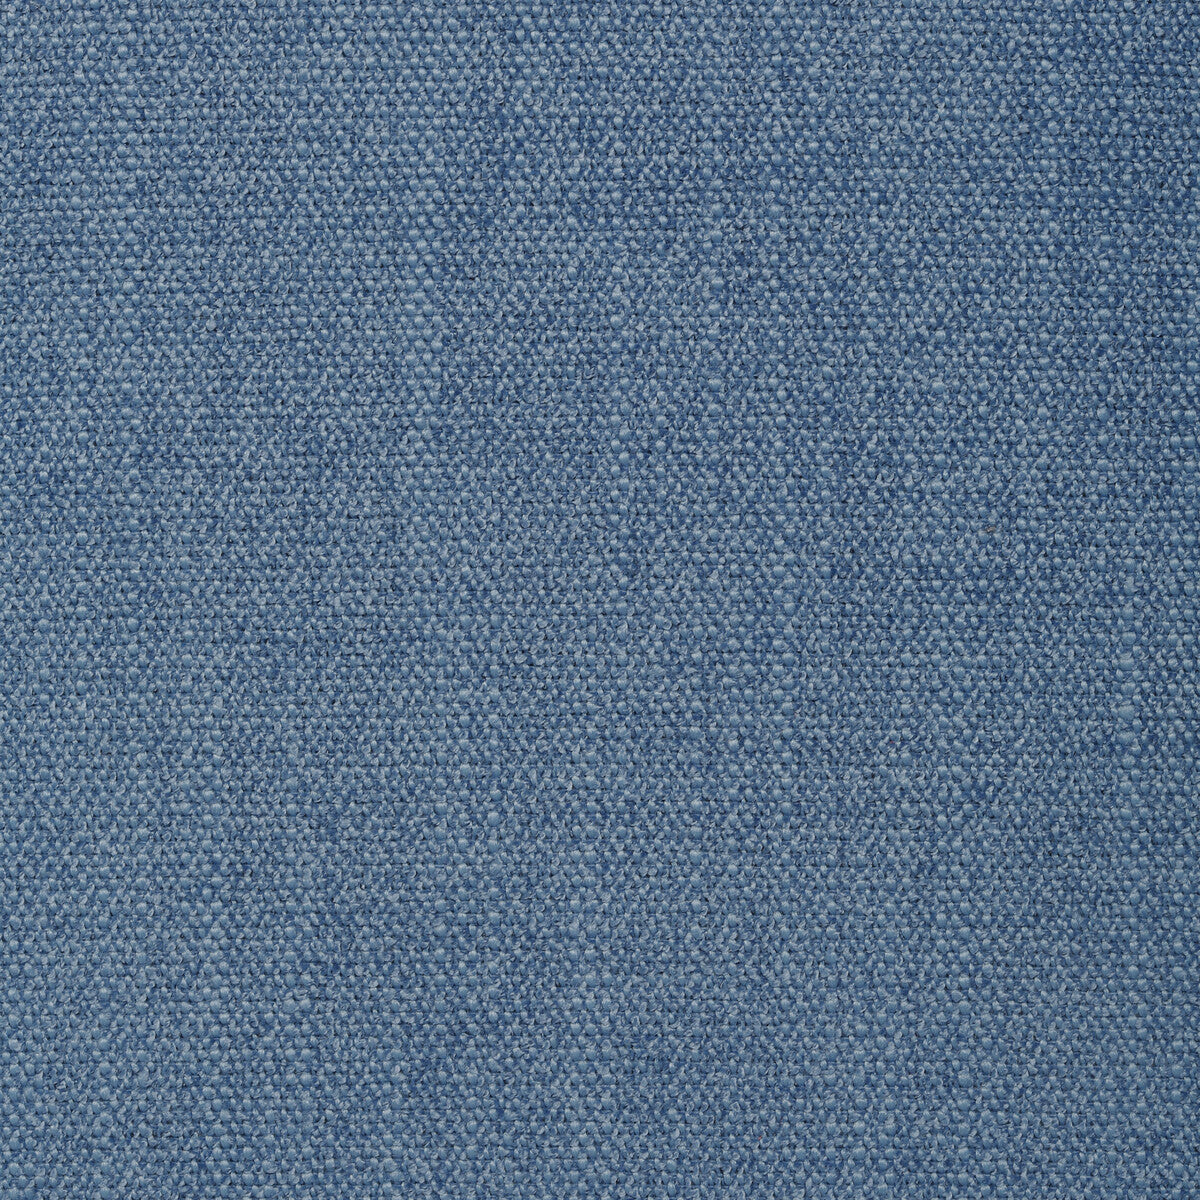 Kravet Smart fabric in 35113-5 color - pattern 35113.5.0 - by Kravet Smart in the Performance Crypton Home collection